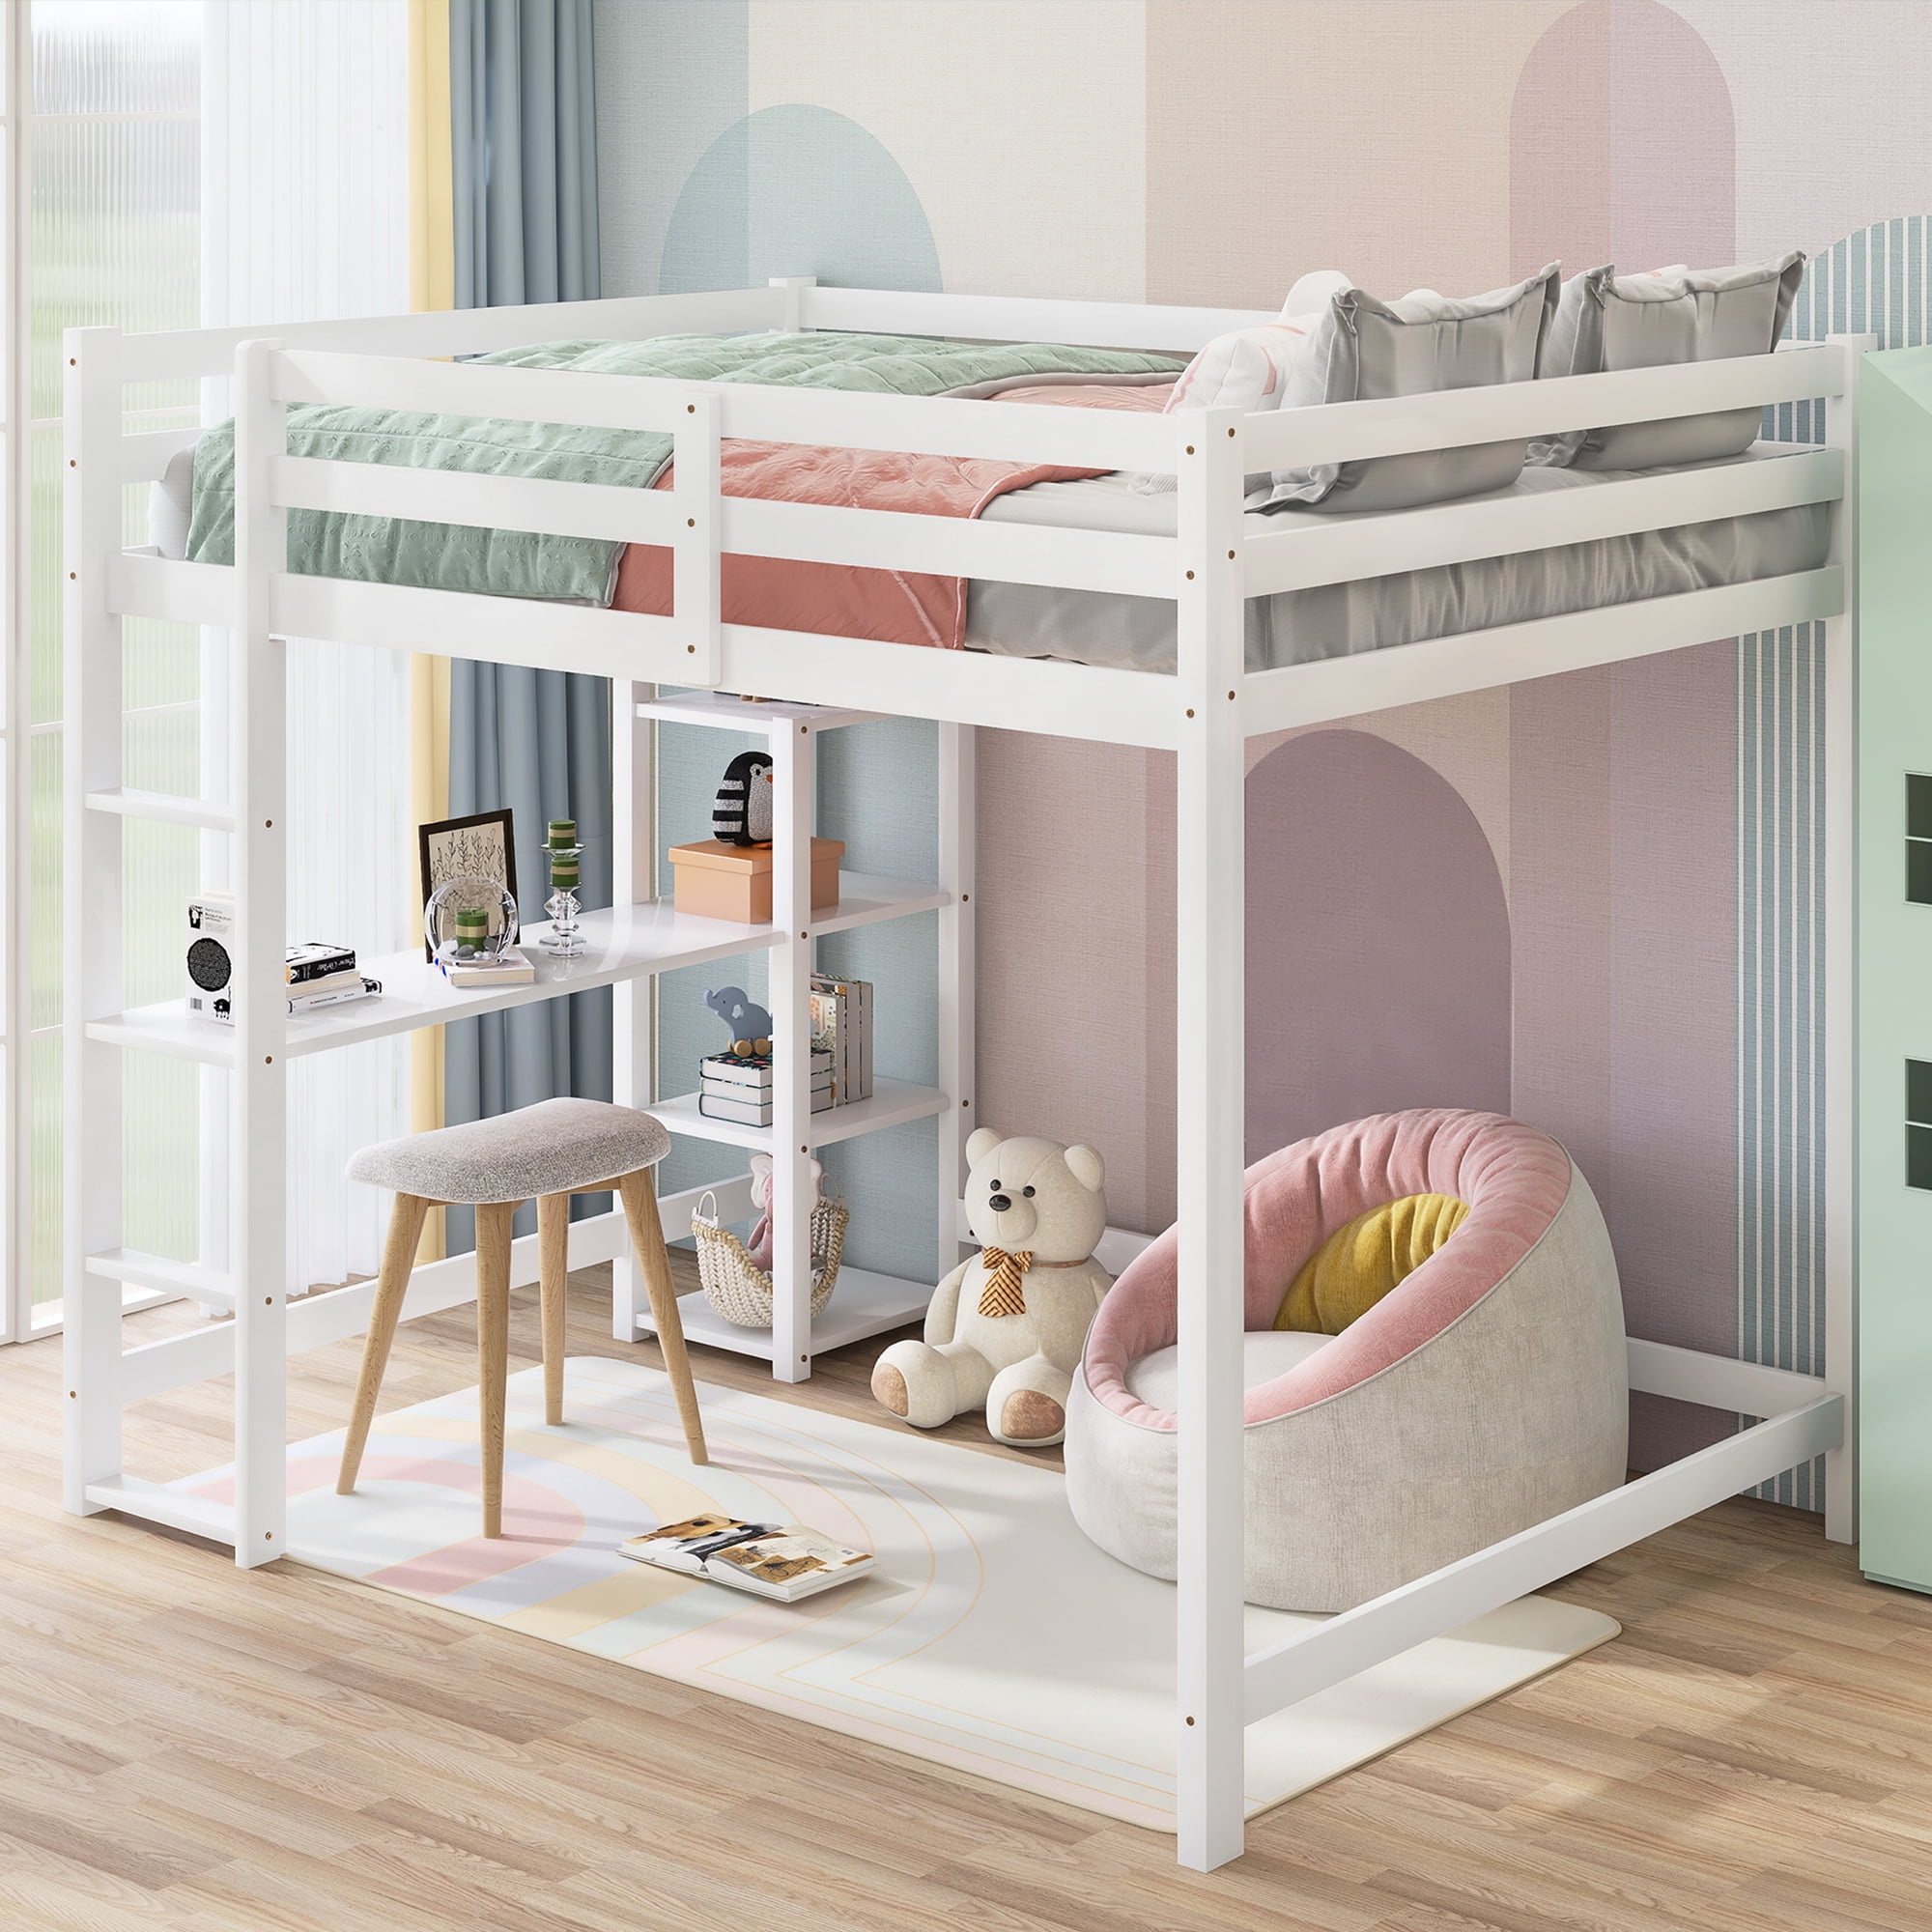 Euroco Full Size Loft Bed With Built-In Desk And Shelves, White -  Walmart.Com